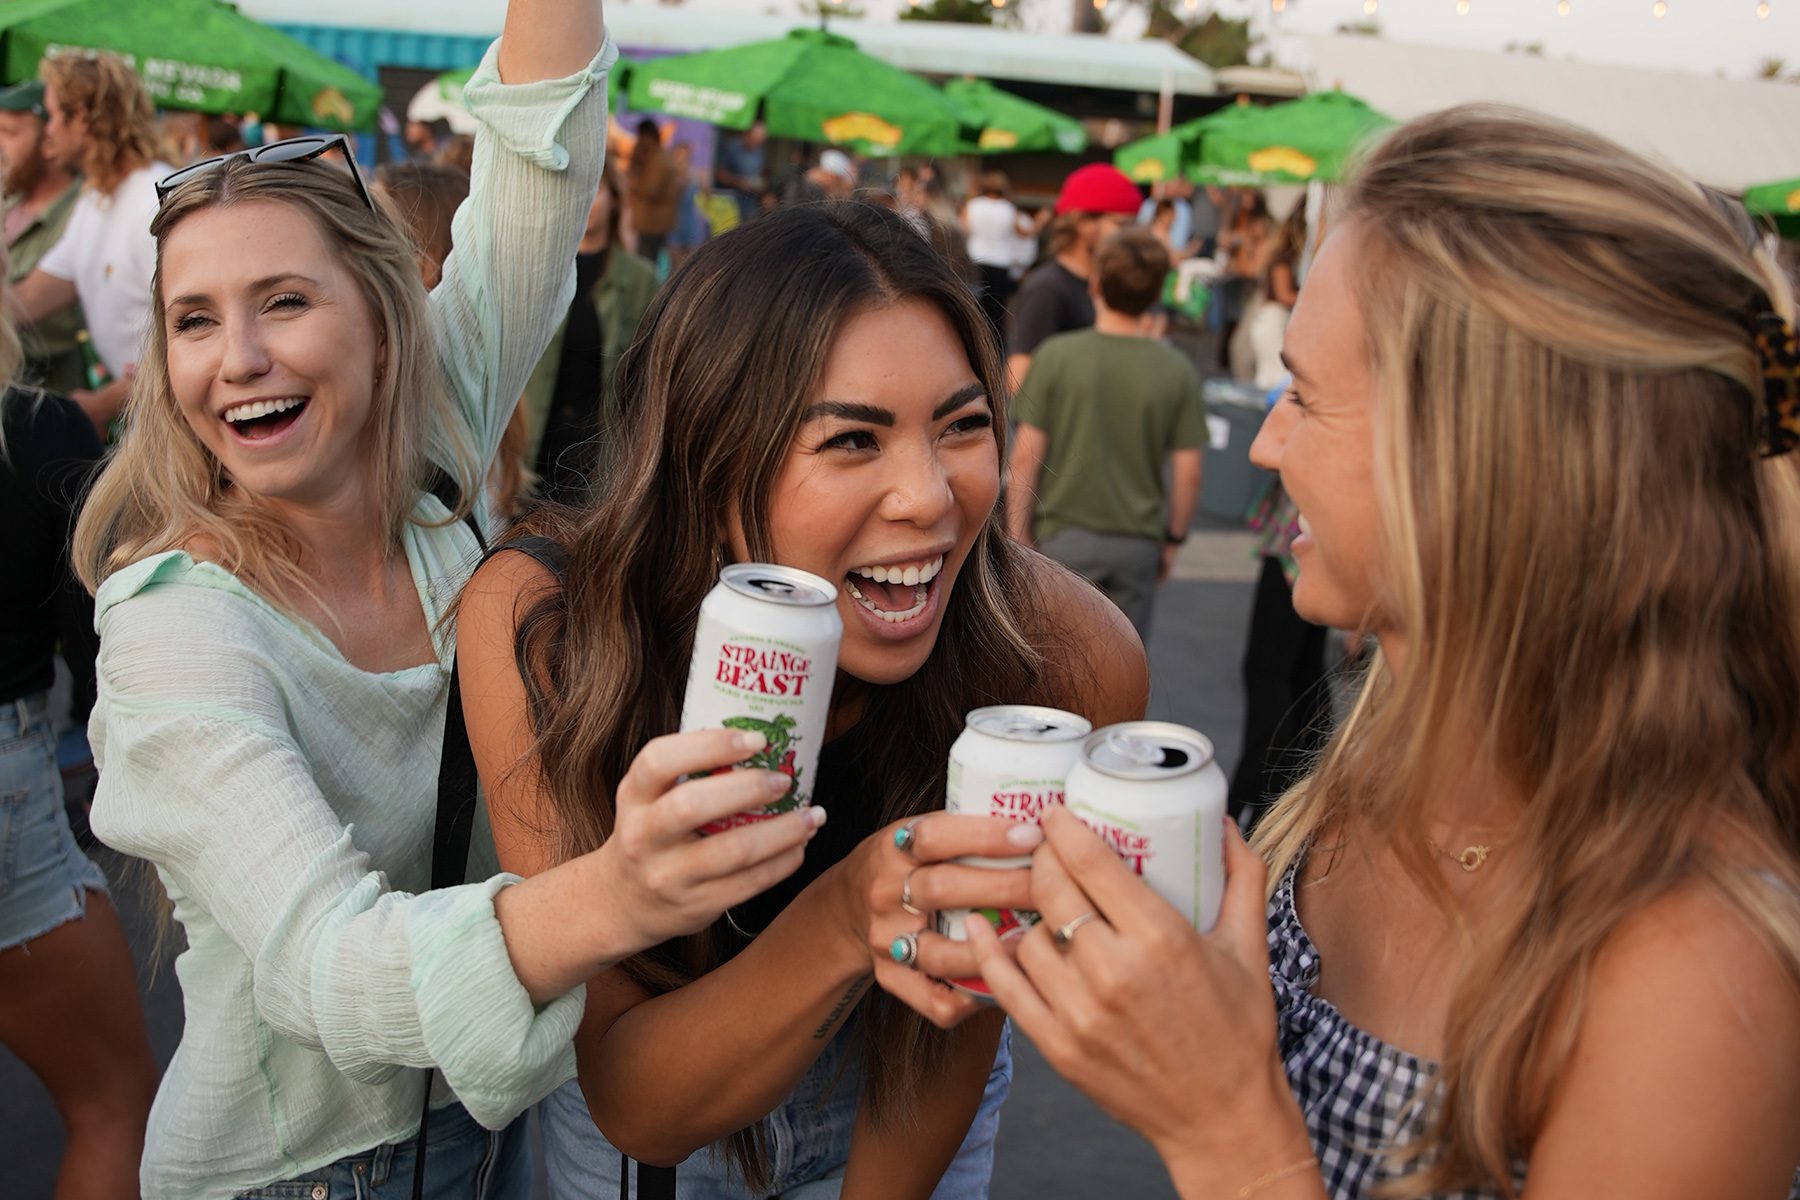 Three friends smiling and toasting cans of Strainge Beast hard kombucha at an outdoor event